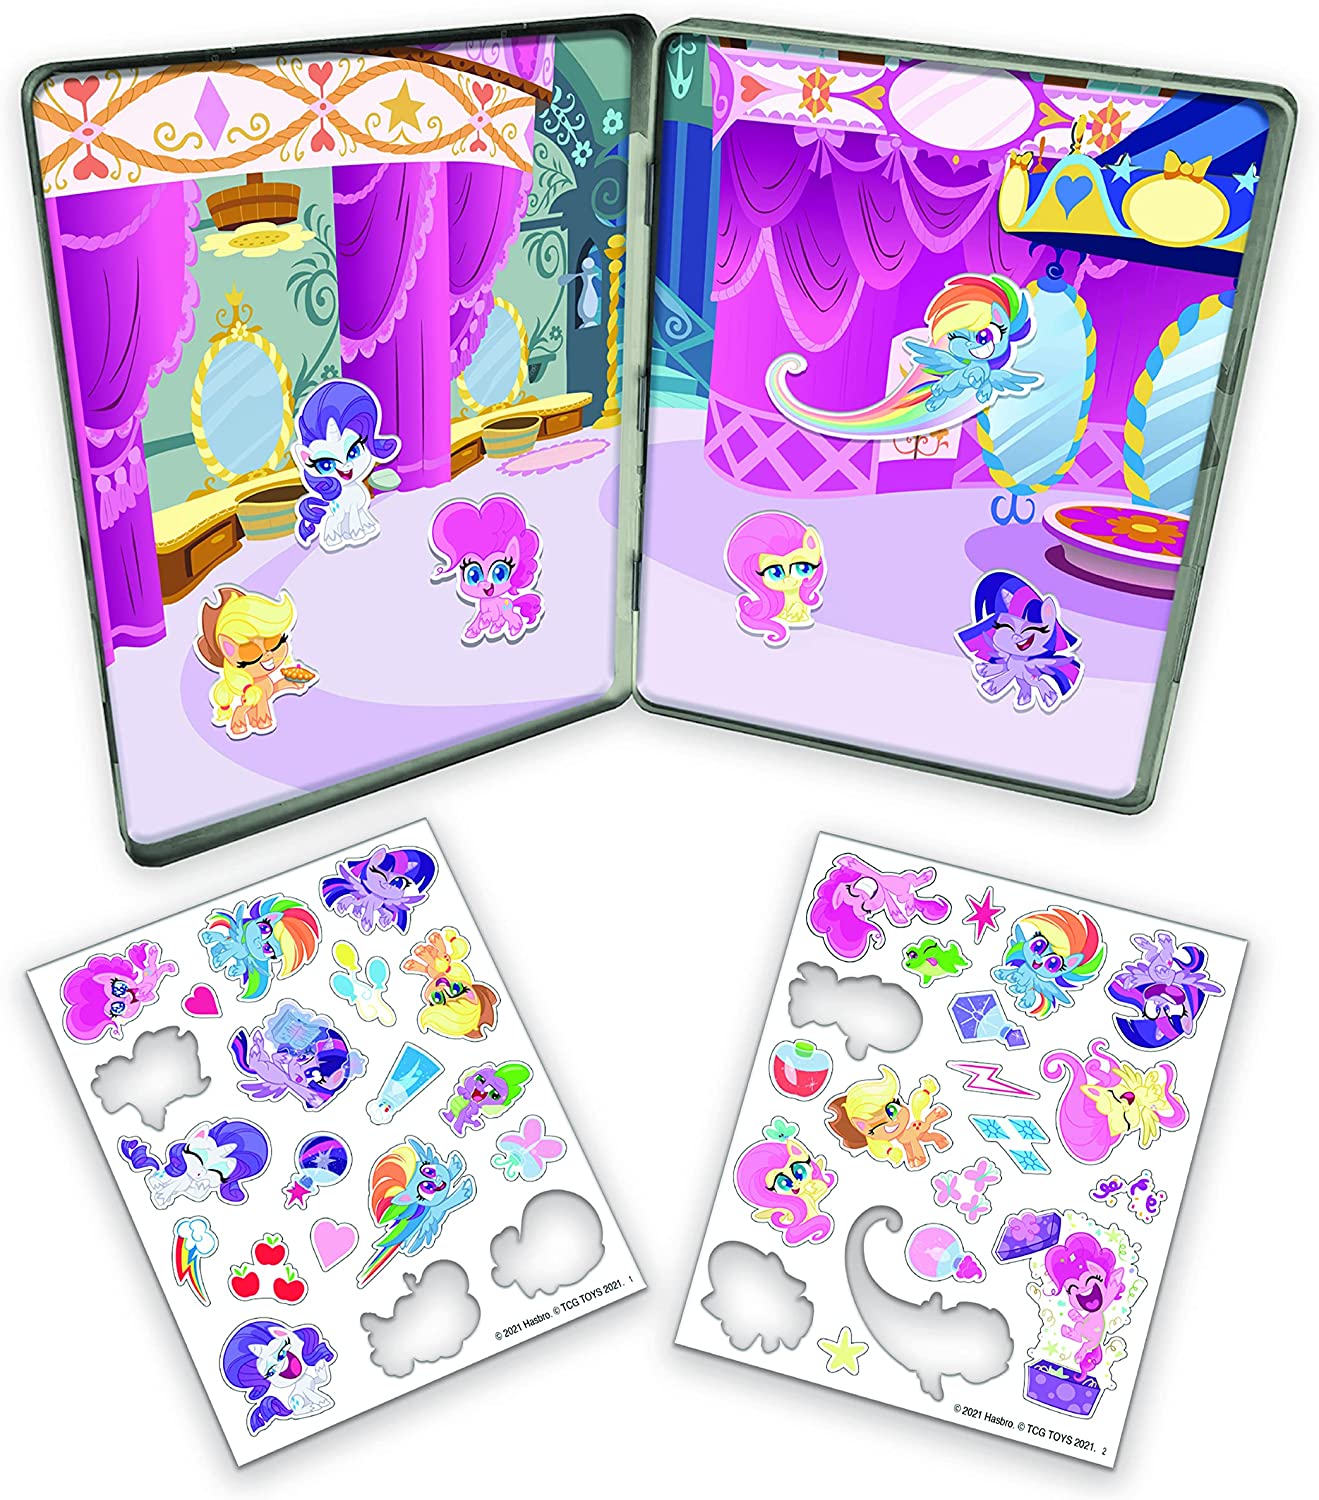 MLP: PL Magnetic Creations Tin Play Set 2